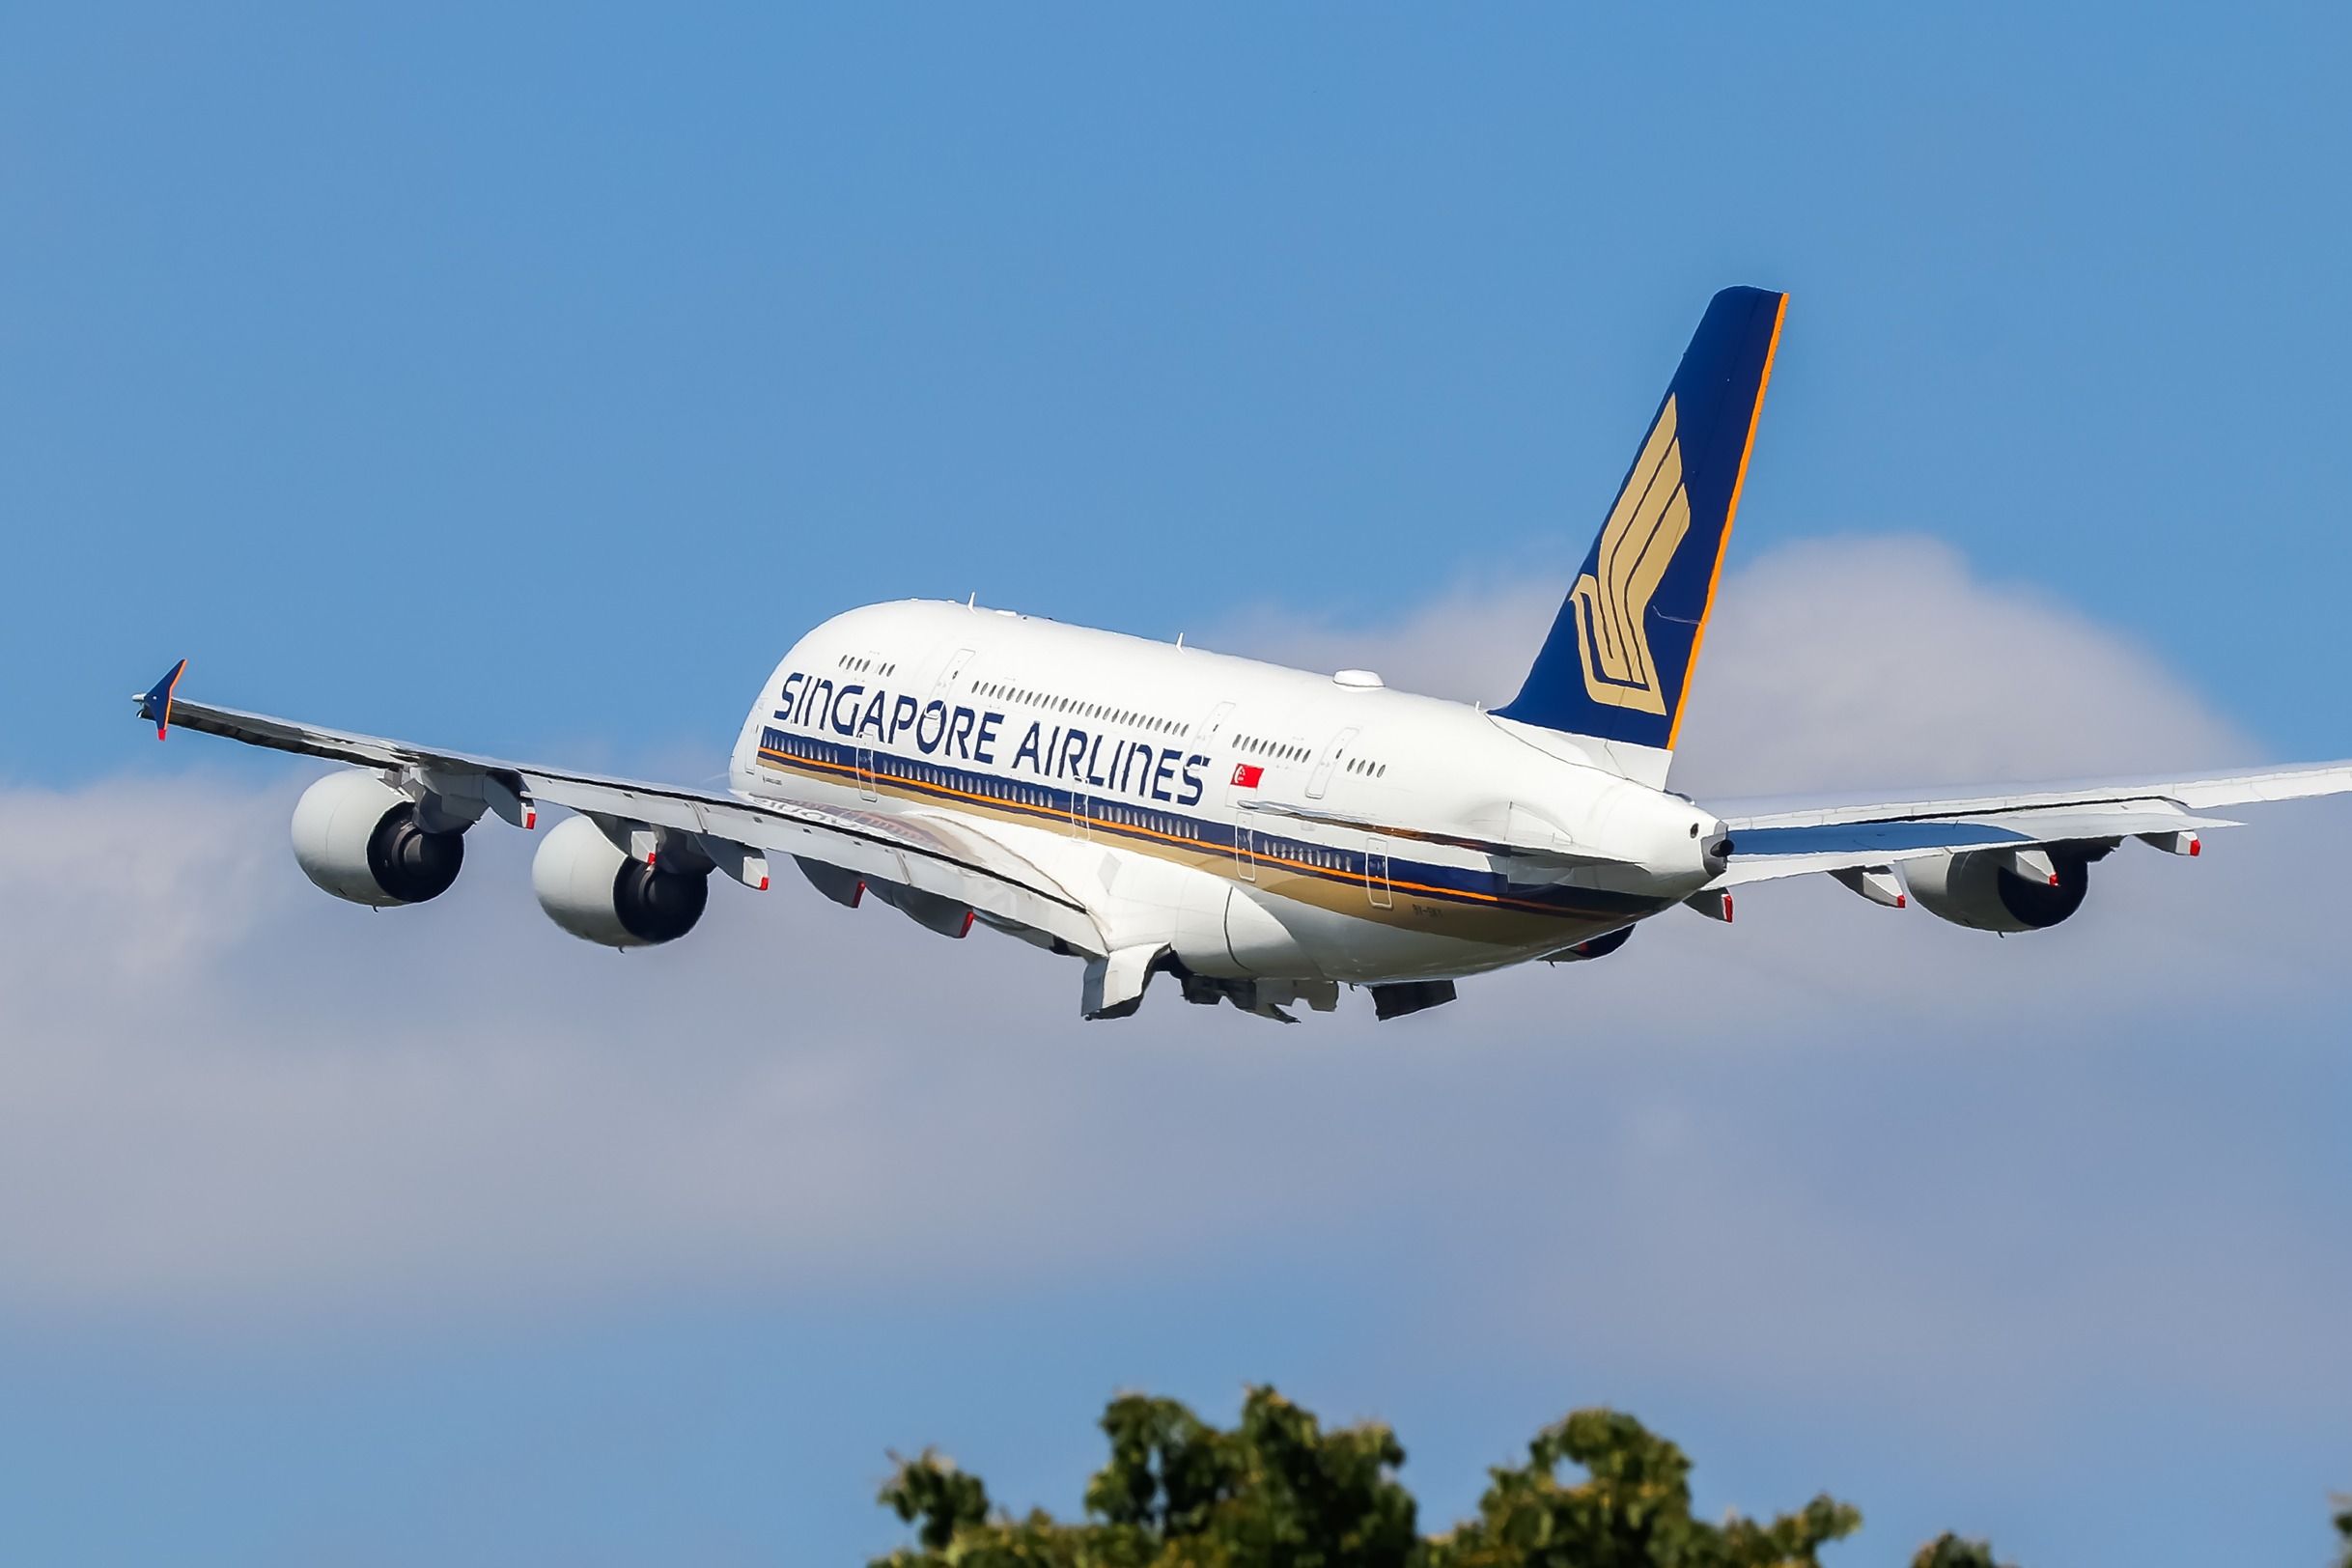 Singapore Airlines Airbus A380 departing